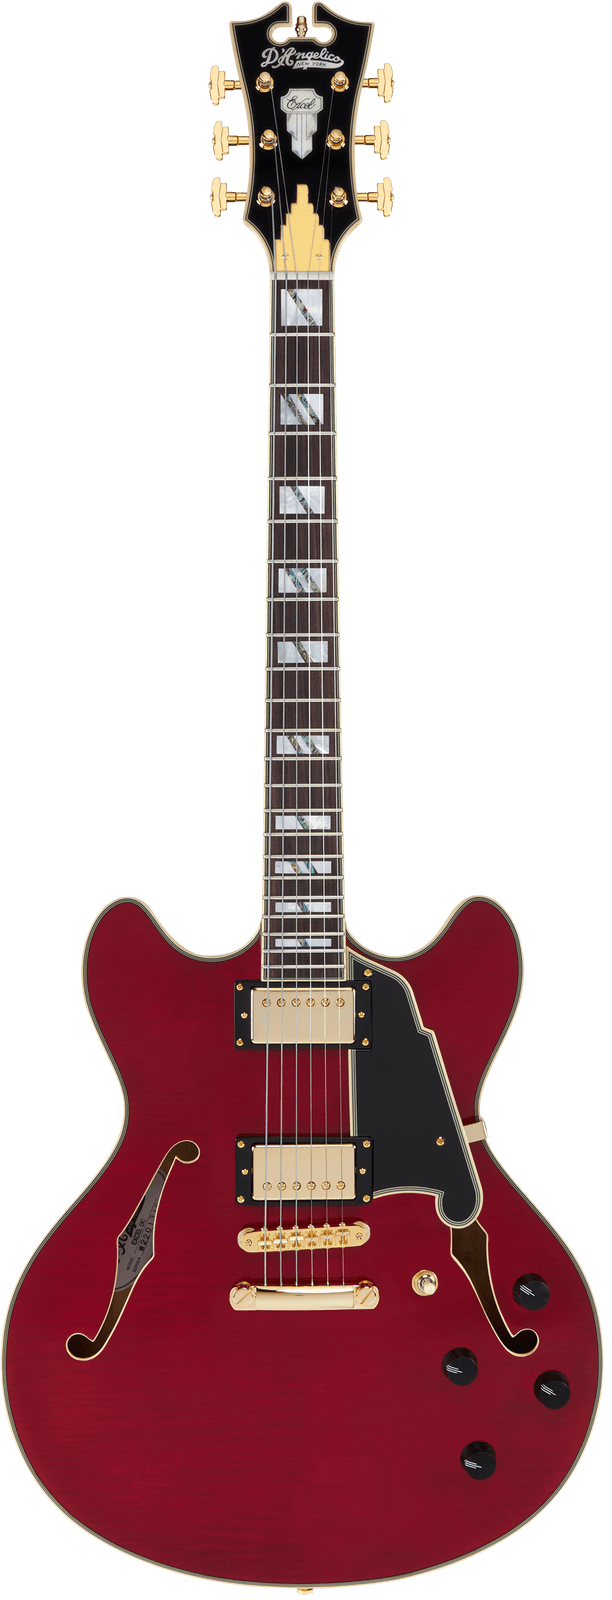 D'Angelico Excel DC